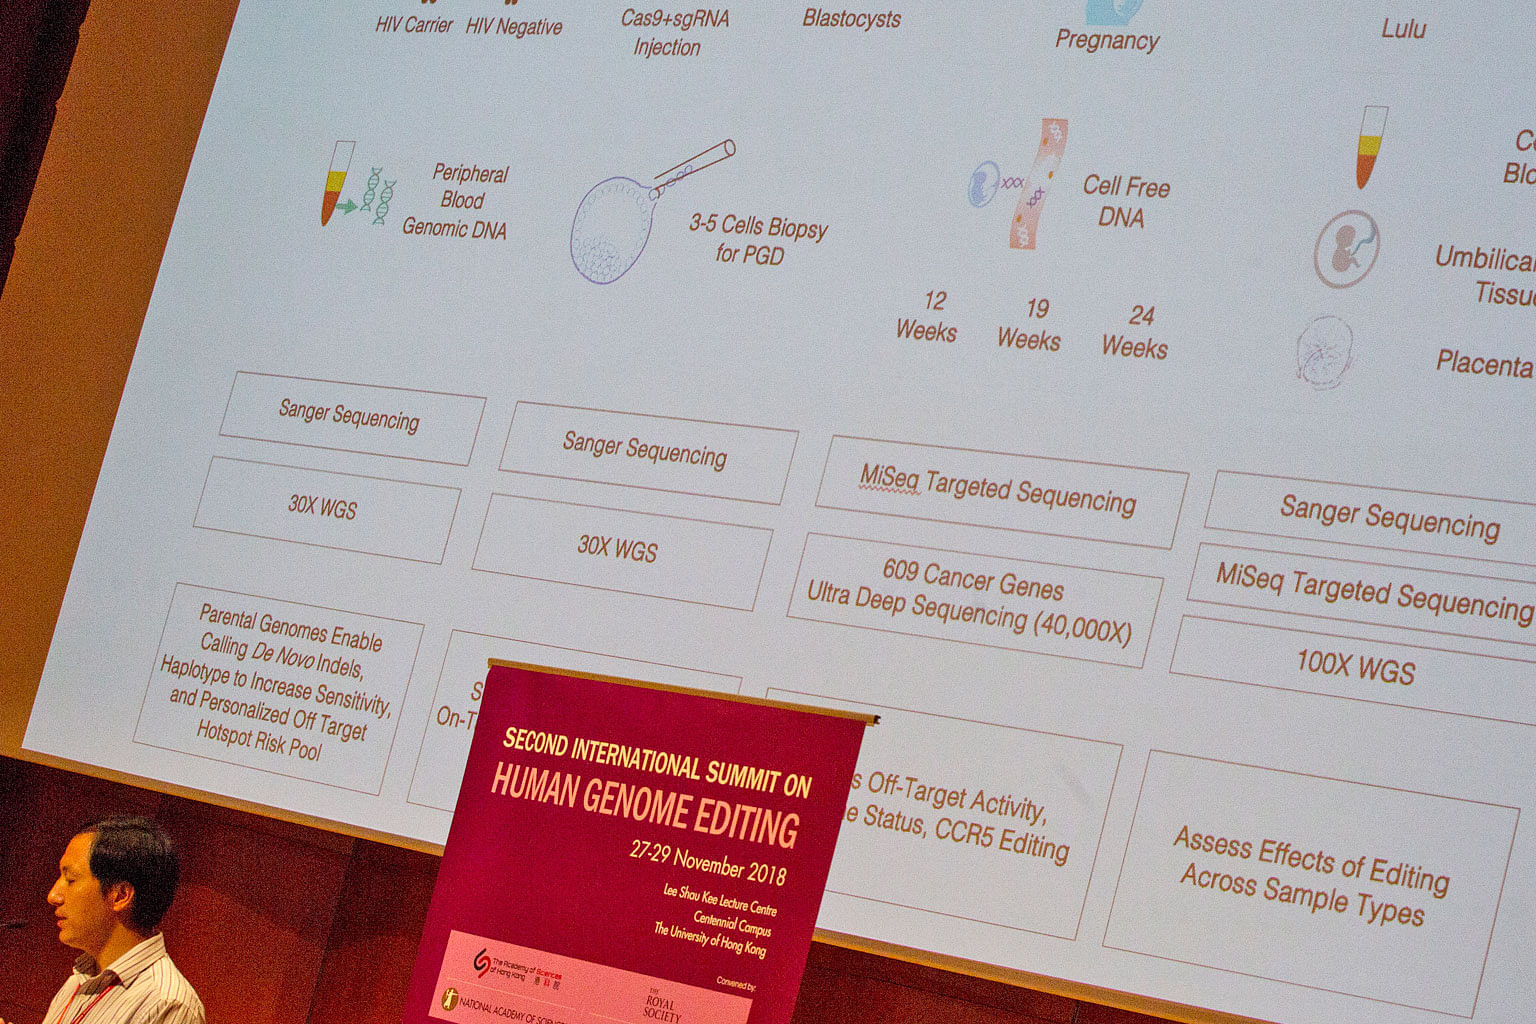 Chinese scientist He Jiankui presenting a slide of his work at the Second International Summit on Human Genome Editing in Hong Kong yesterday. Professor He, who claims to have created the world's first genetically edited twin babies, has defended his